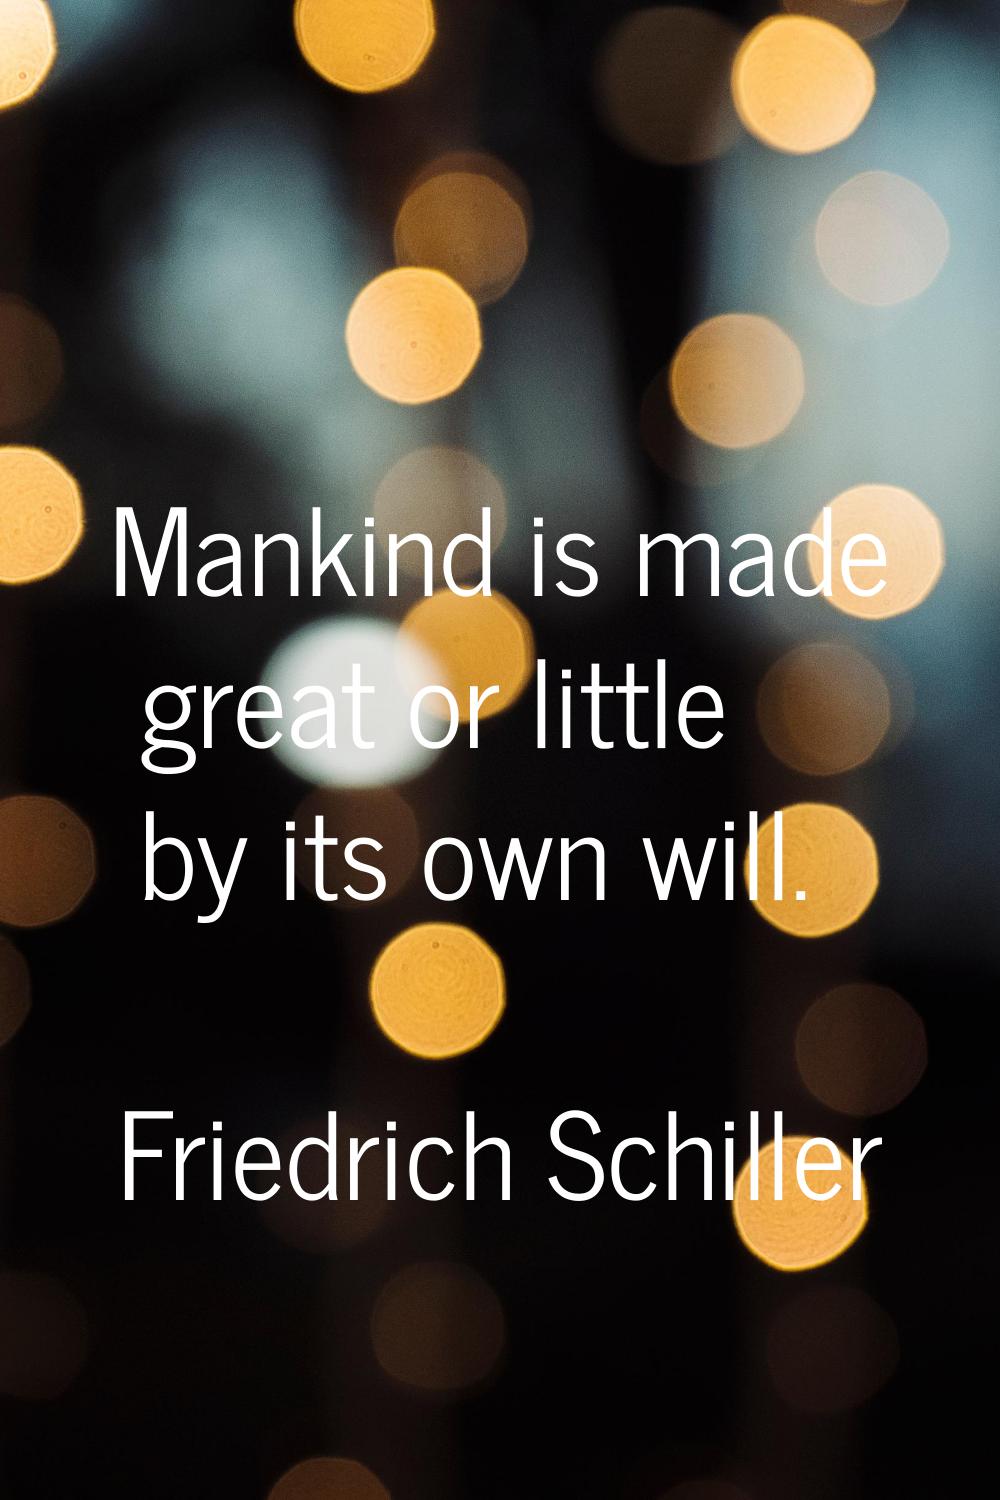 Mankind is made great or little by its own will.